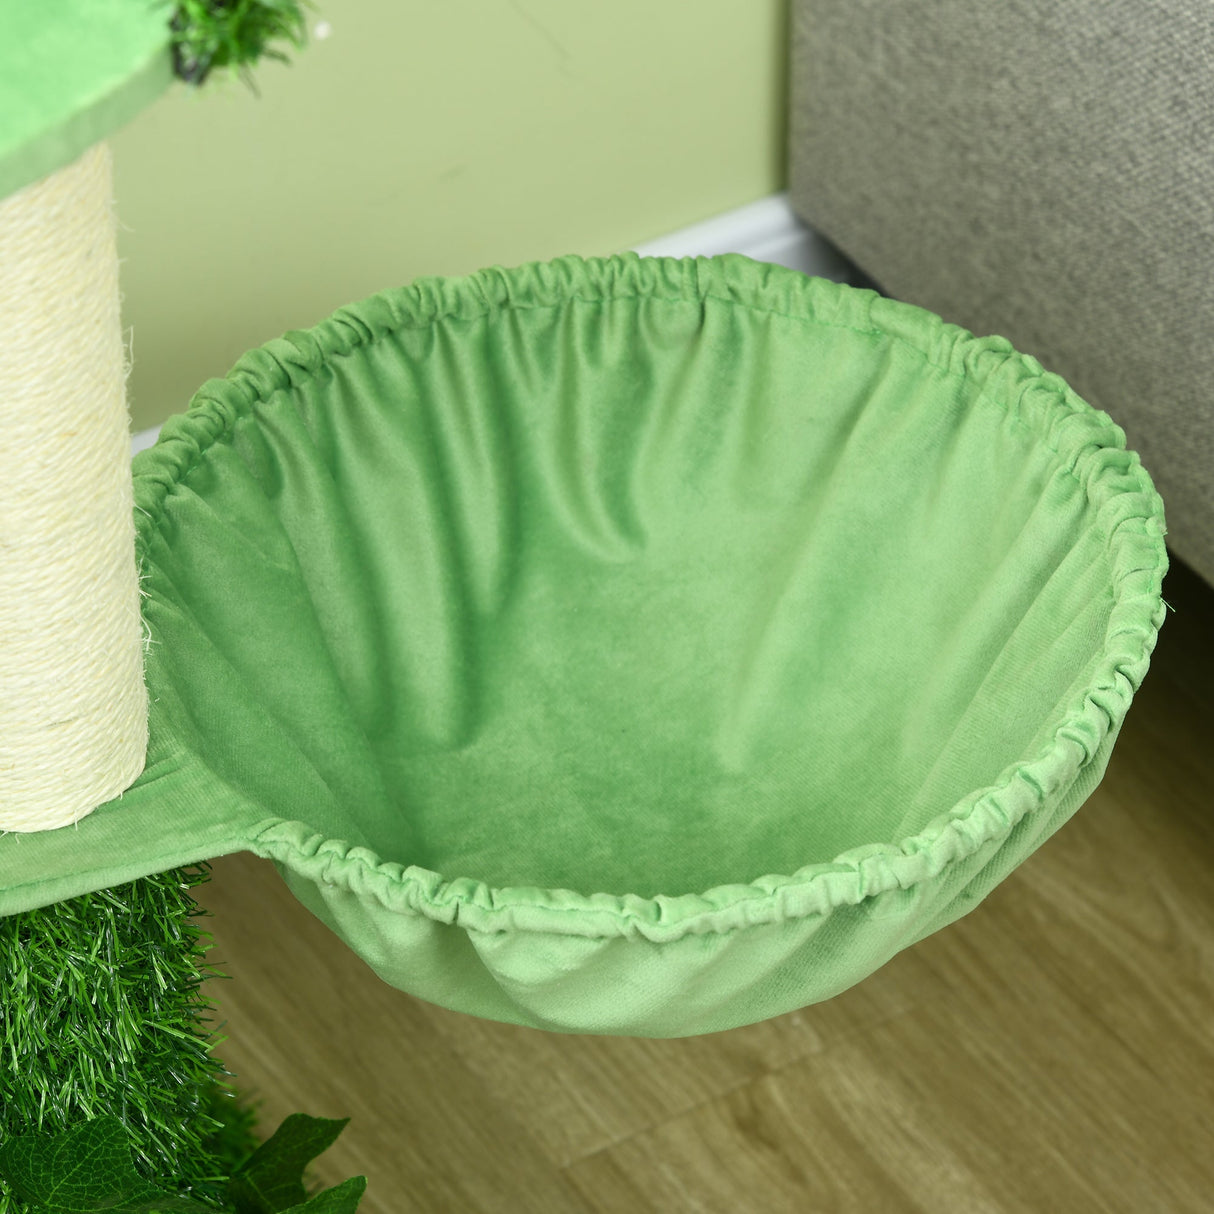 77cm Cat Tree for Indoor Cats with Green Leaves, Scratching Posts, Hammock - Green, PawHut,